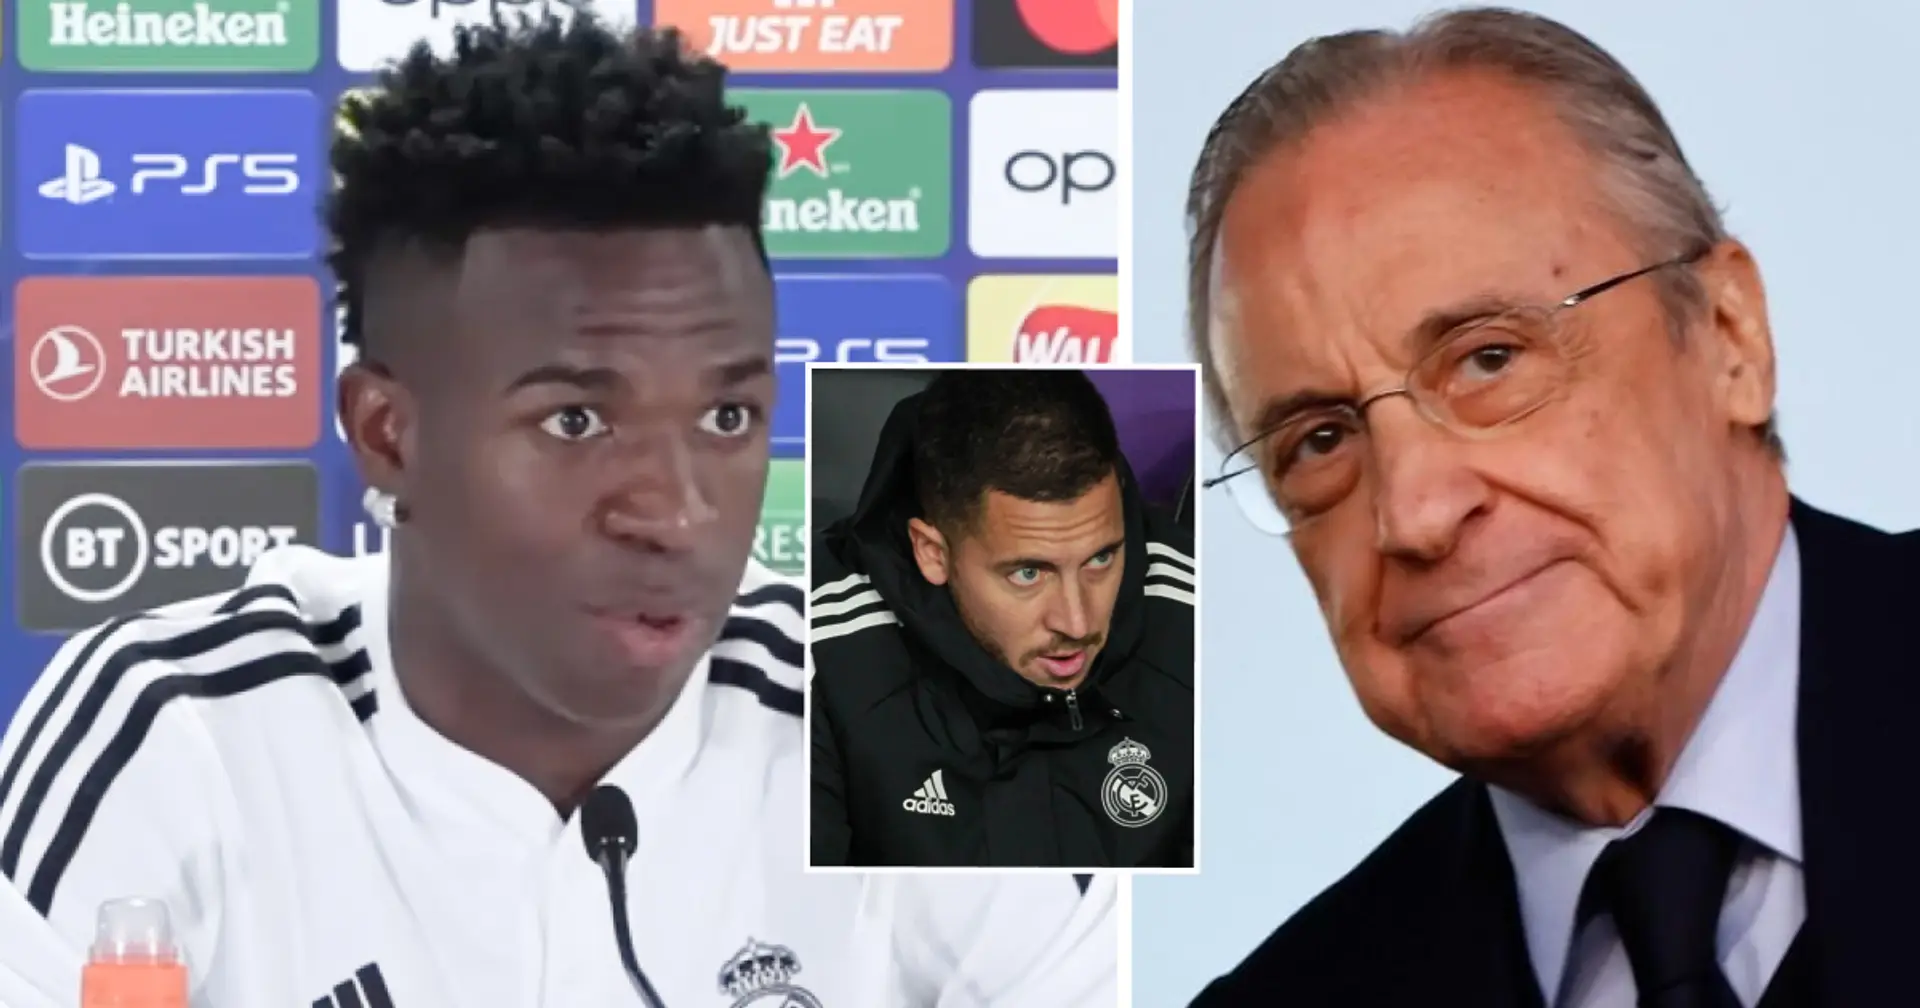 Vinicius salary at Real Madrid revealed — it's three times less than Hazard's